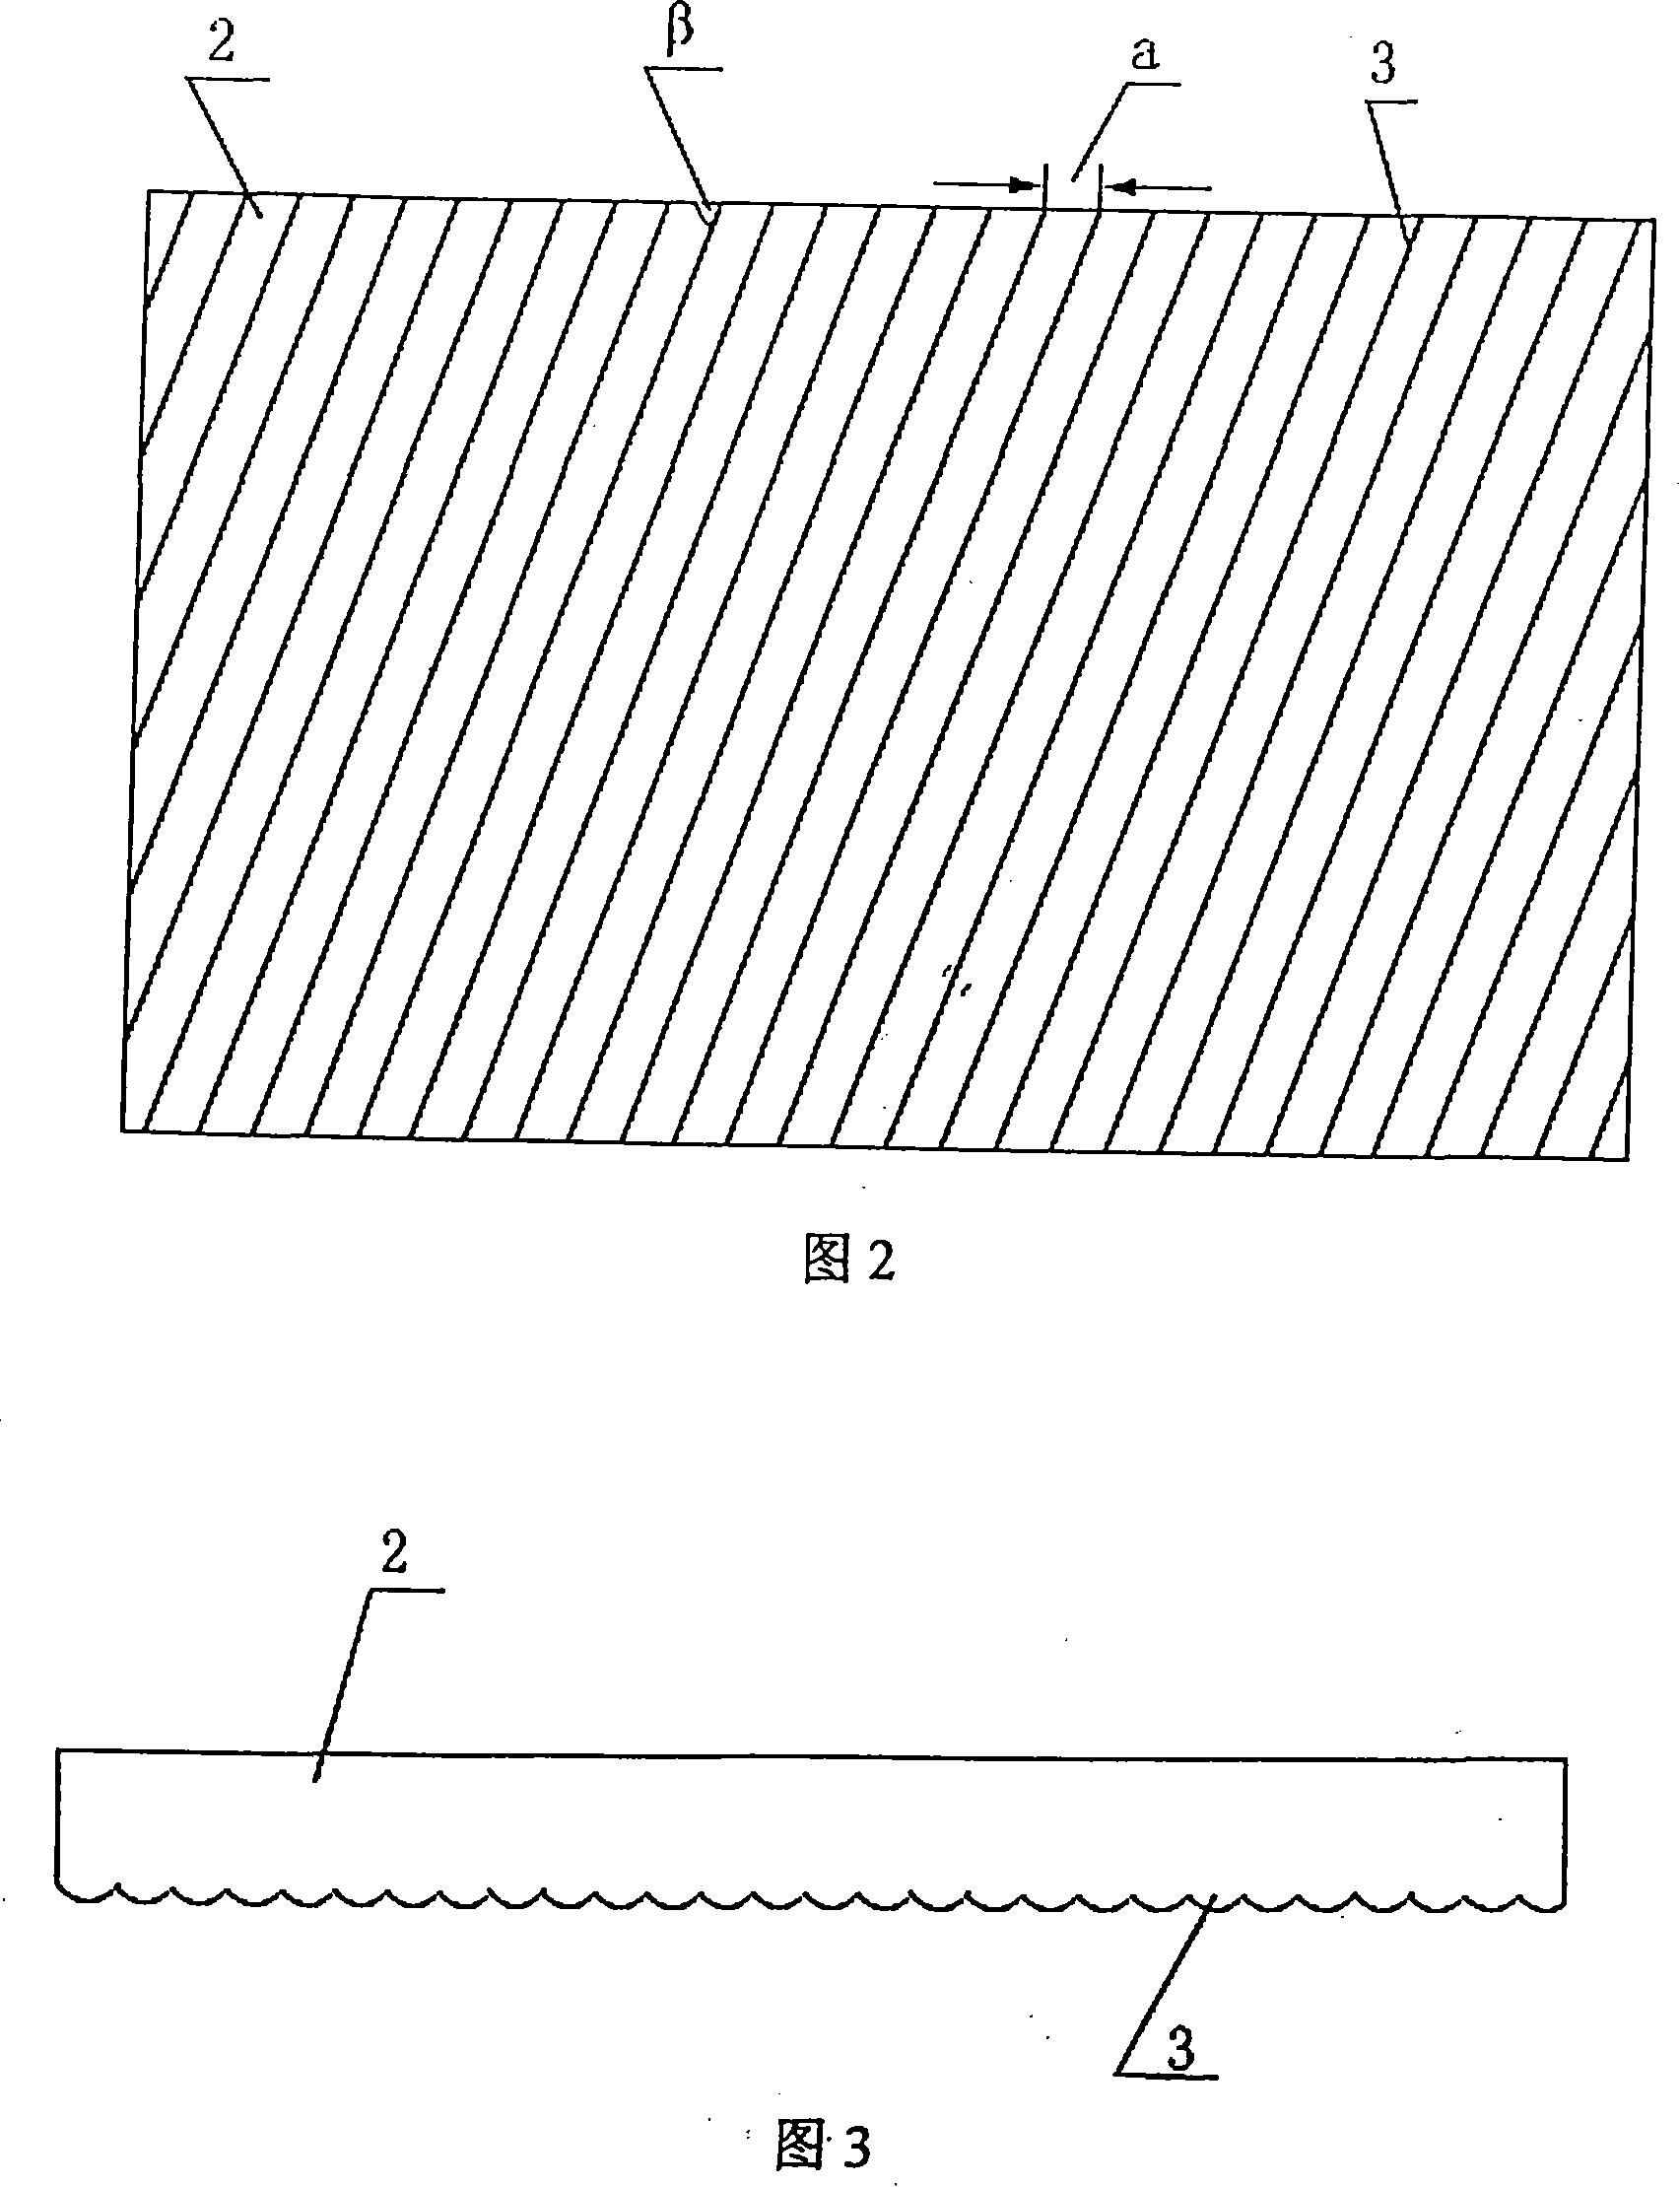 Naked eye visible stereo display system and its implementation method